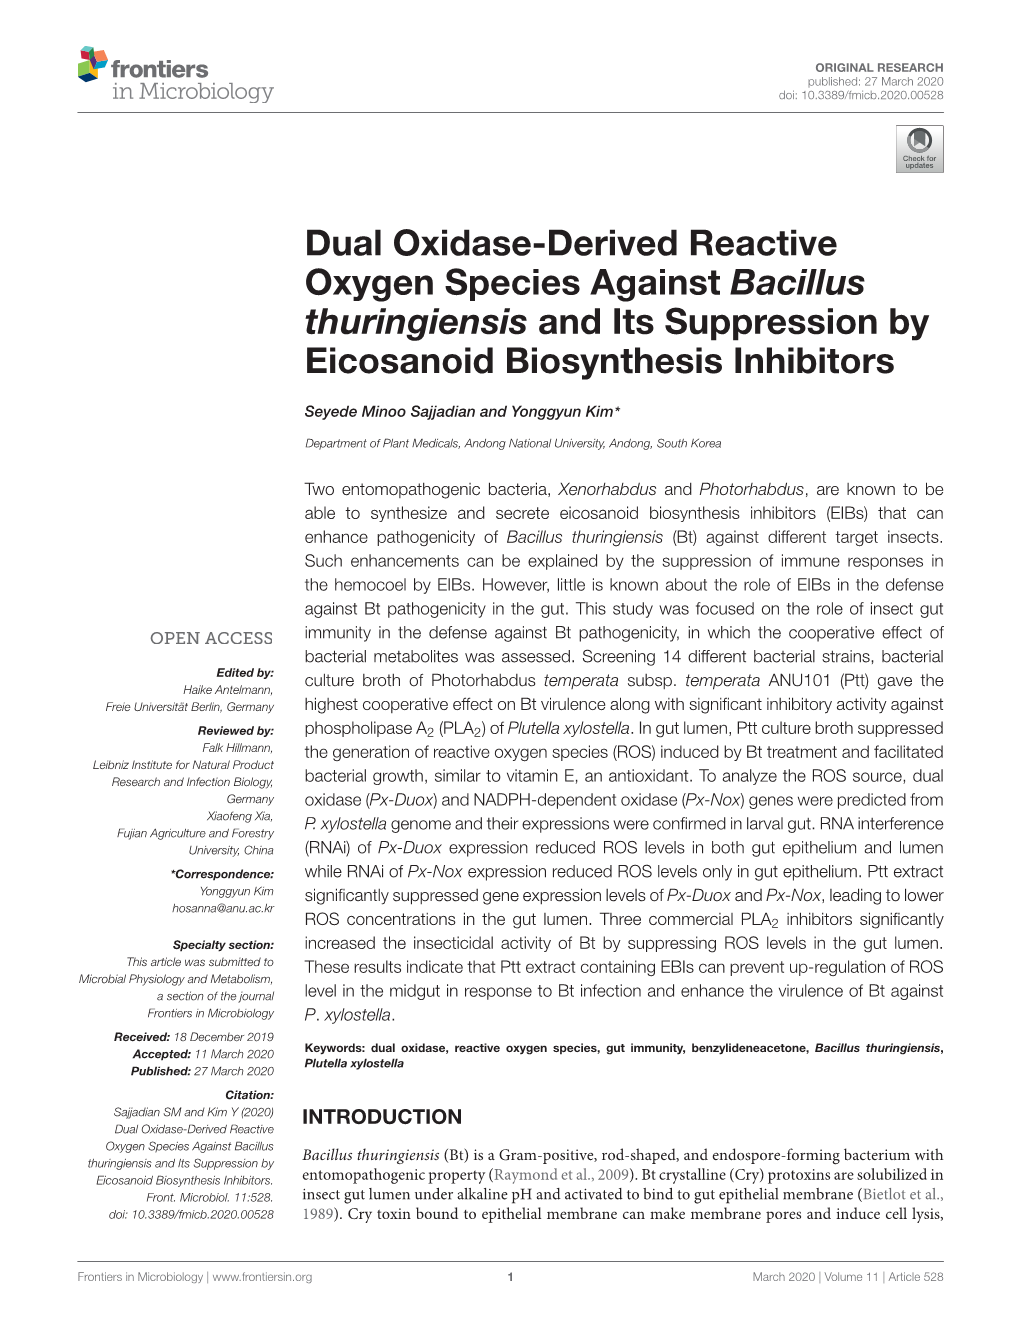 Dual Oxidase-Derived Reactive Oxygen Species Against Bacillus Thuringiensis and Its Suppression by Eicosanoid Biosynthesis Inhibitors